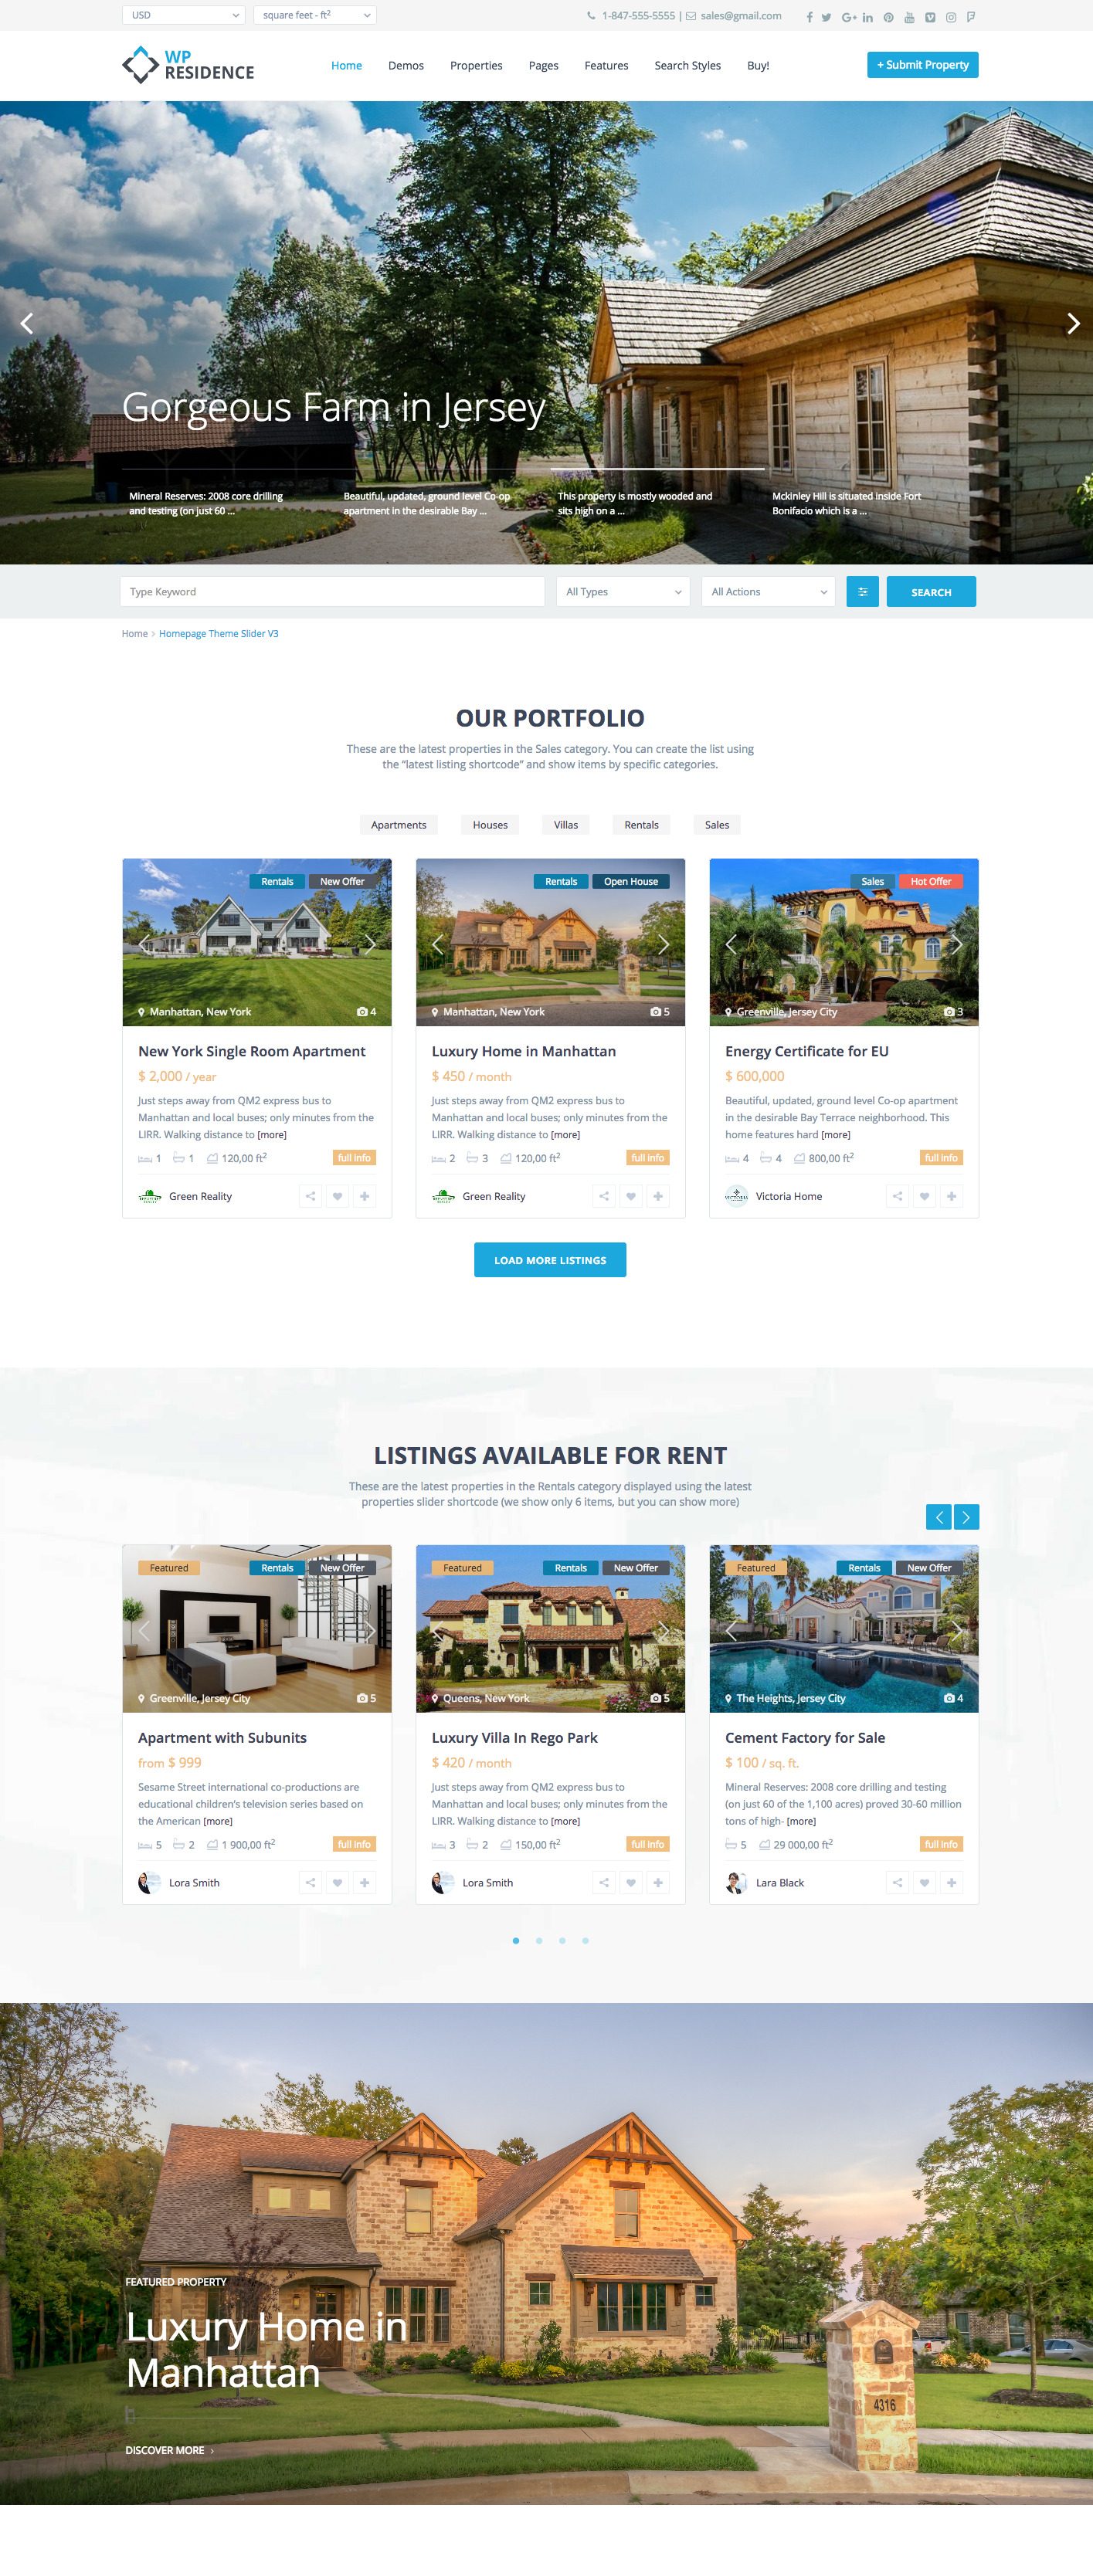 HOW TO MAKE YOUR REAL ESTATE HOME PAGE INVITING